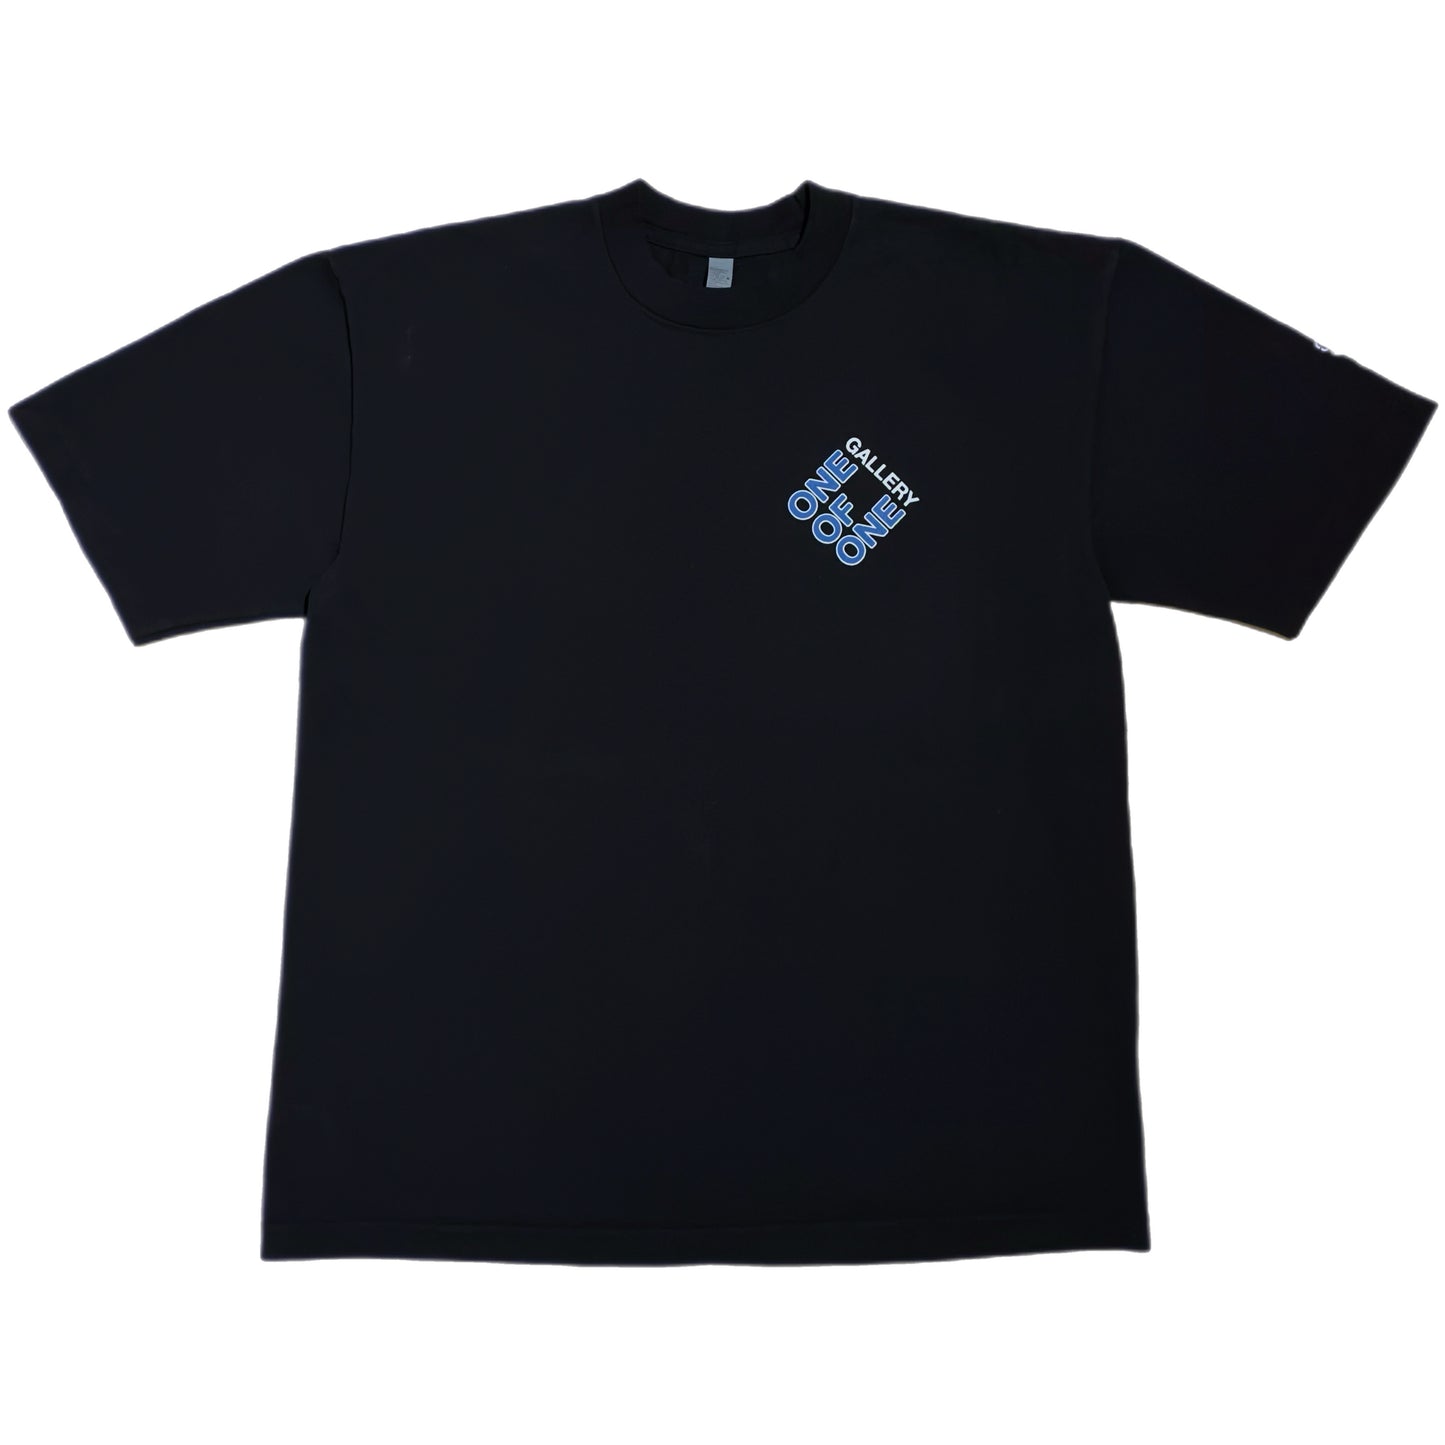 ONEOFONEGALLERY Tee “Black”